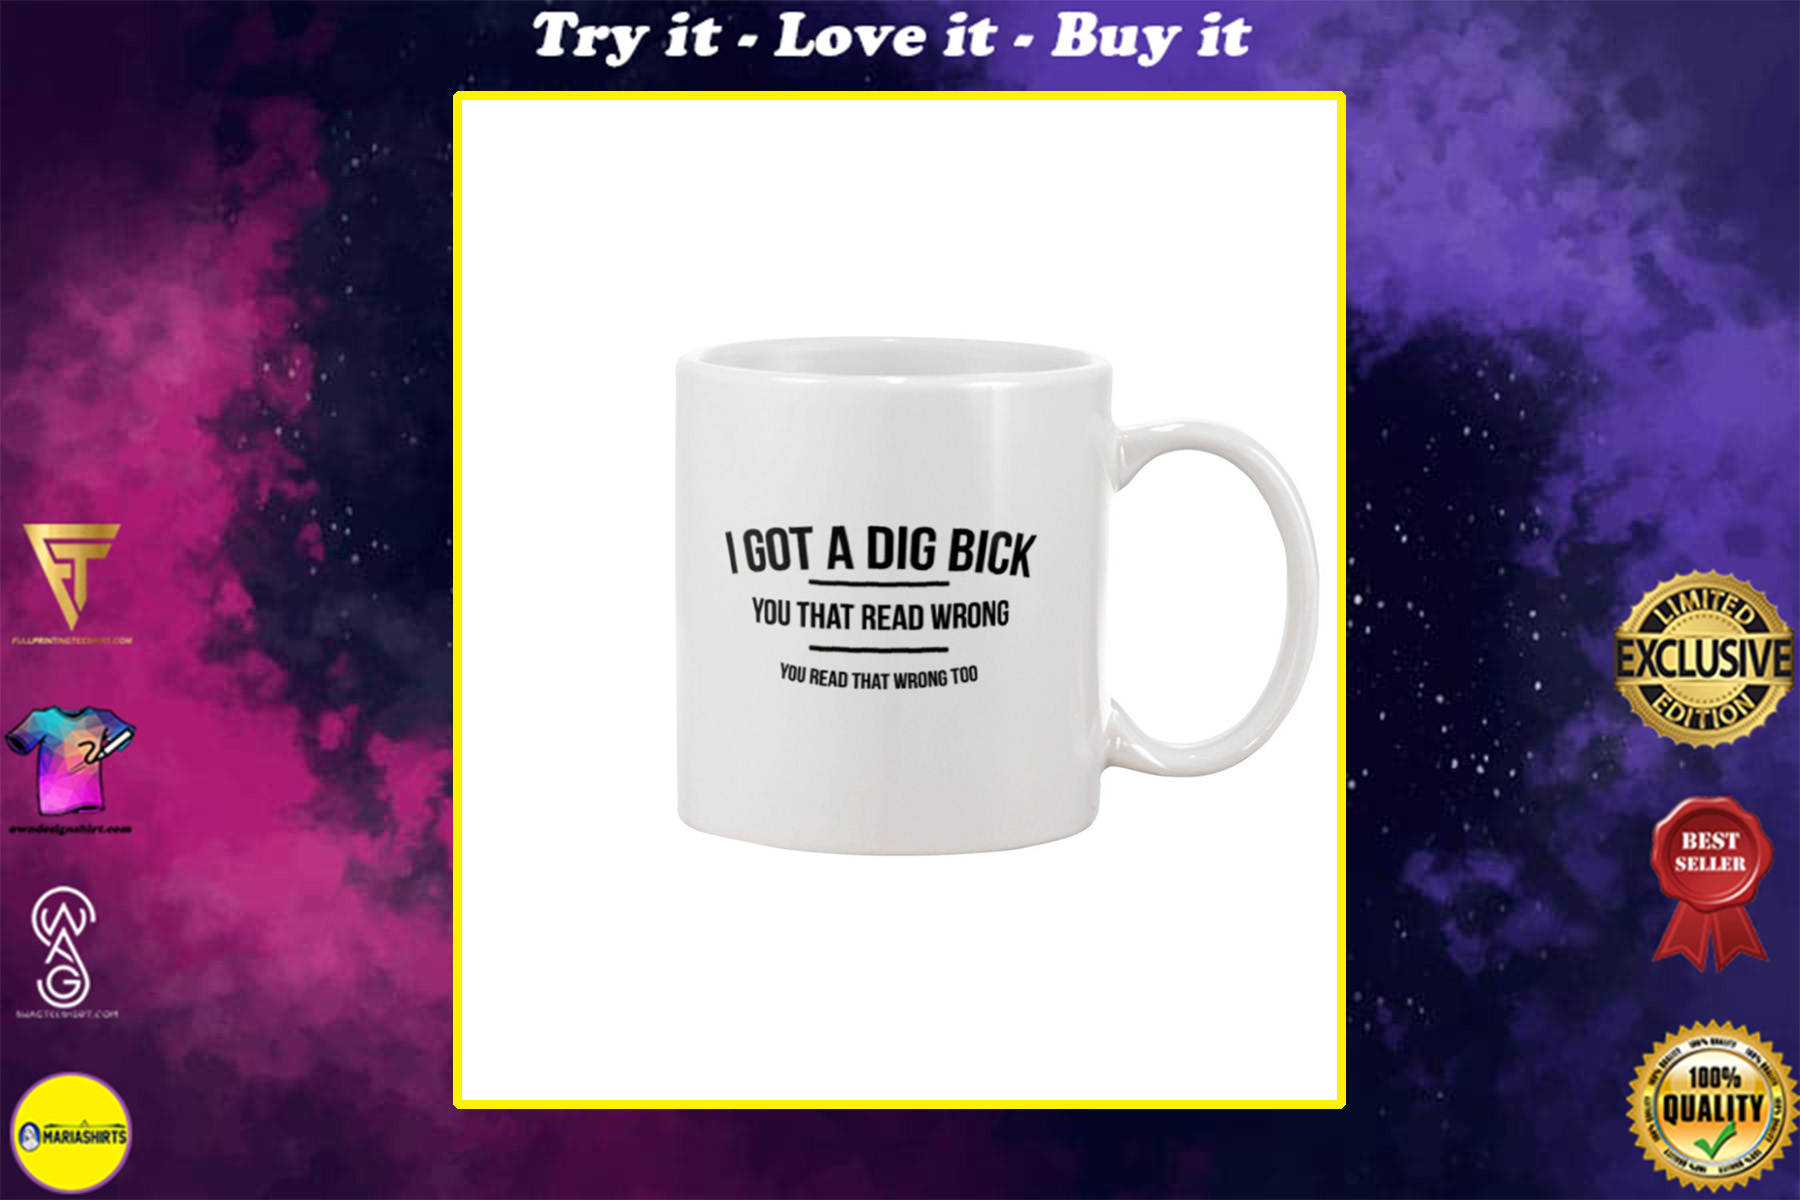 i got a dig bick you that read wrong you read that wrong too mug